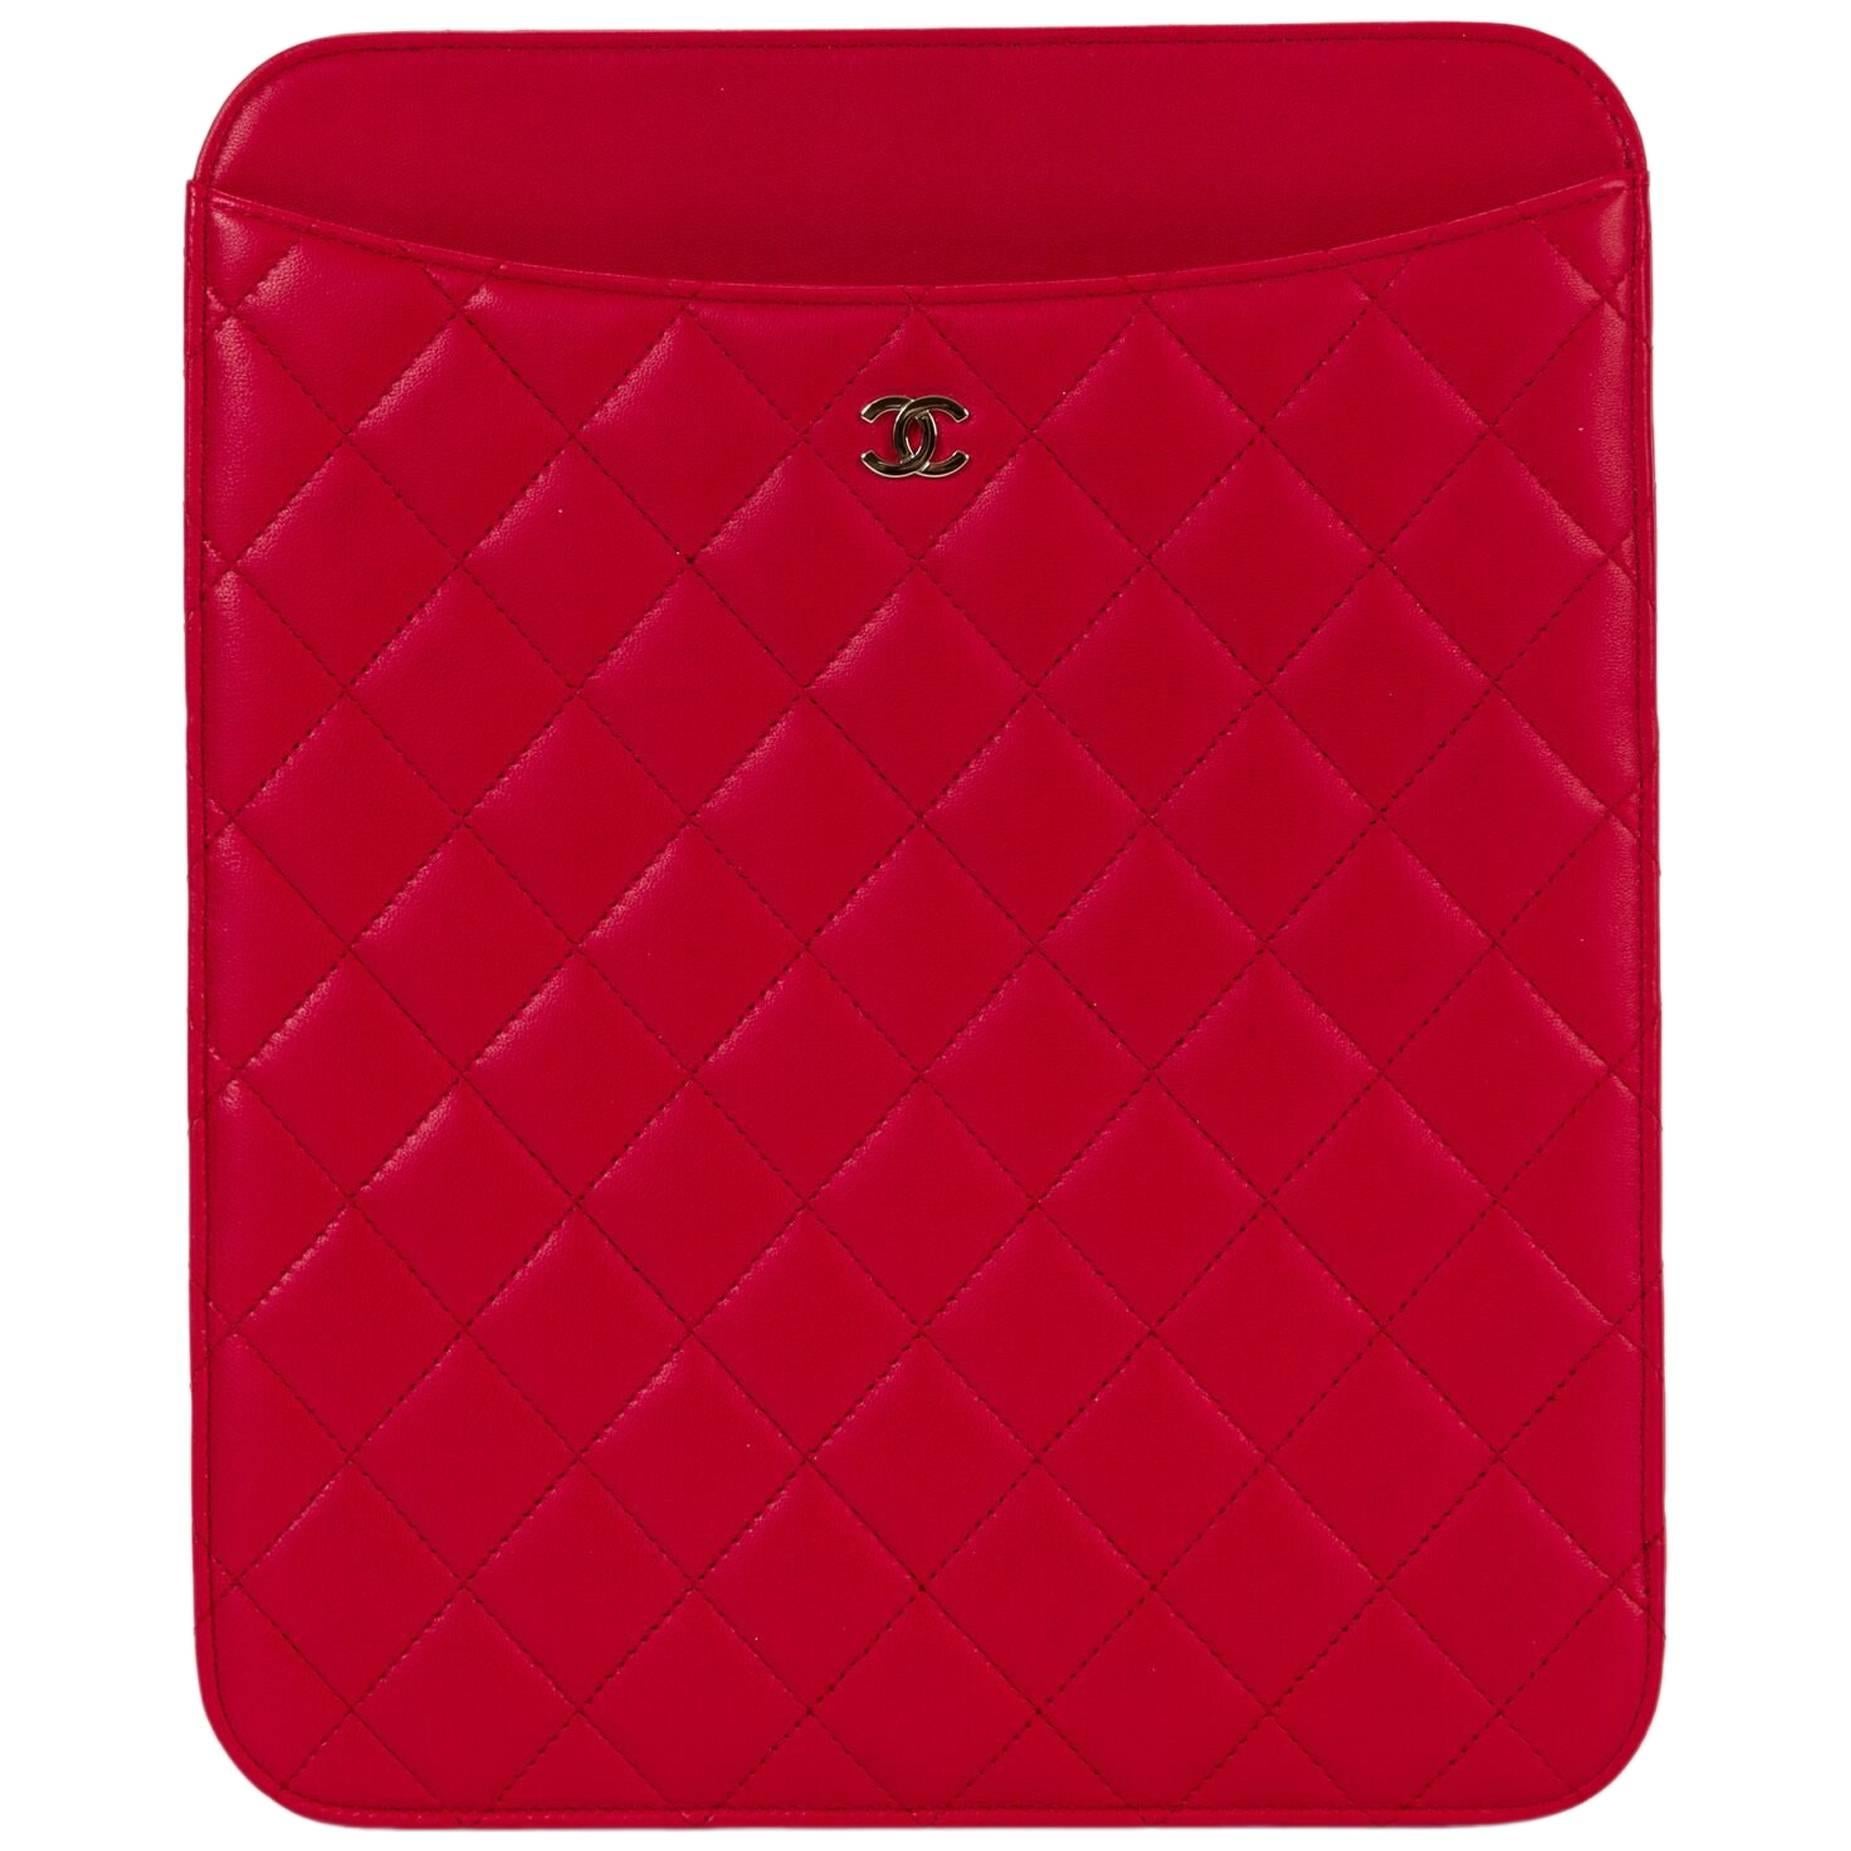 New in Box Chanel Red Ipad Quilted Red Leather Case